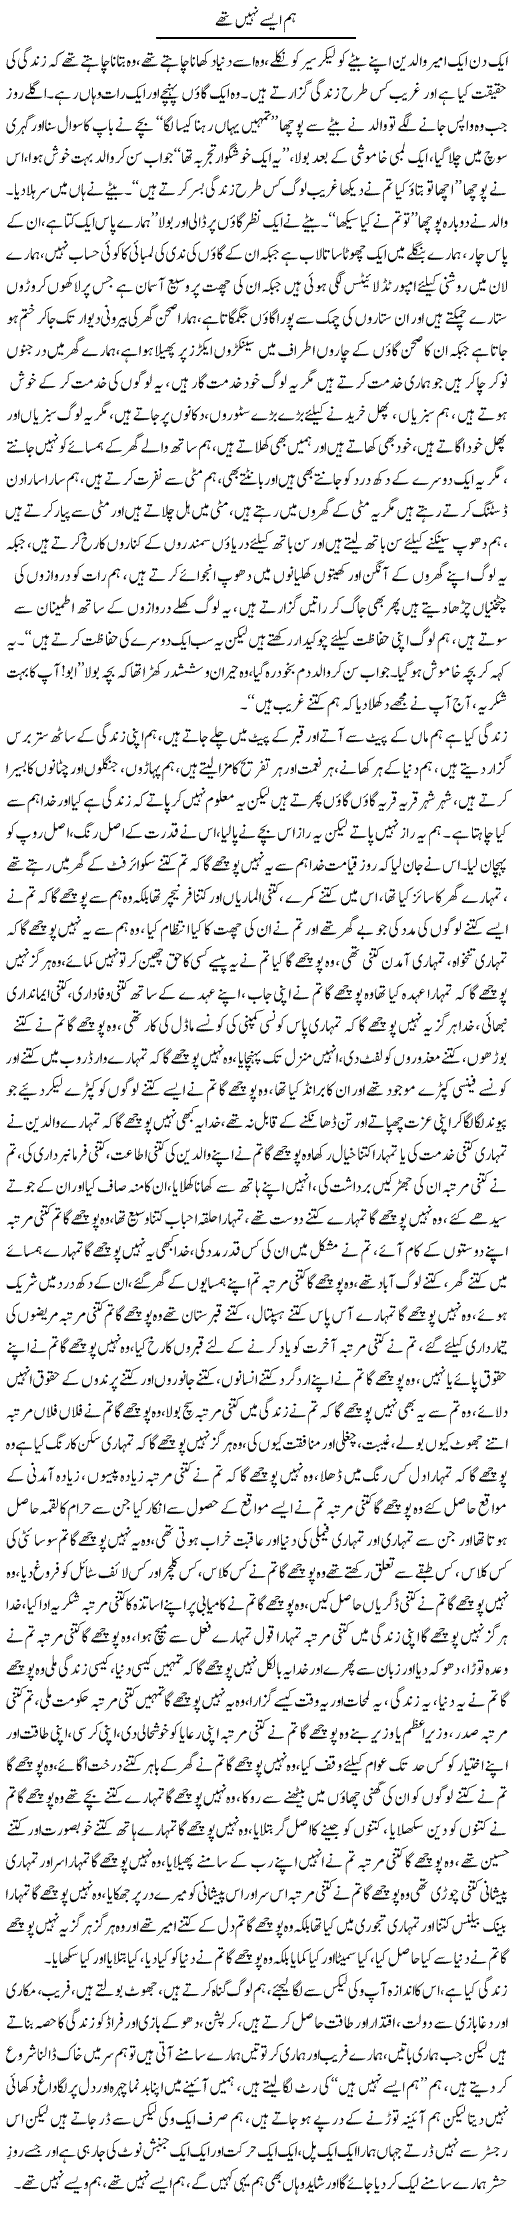 Was Not Like This Express Column Amad Chaudhry 12 December 2010